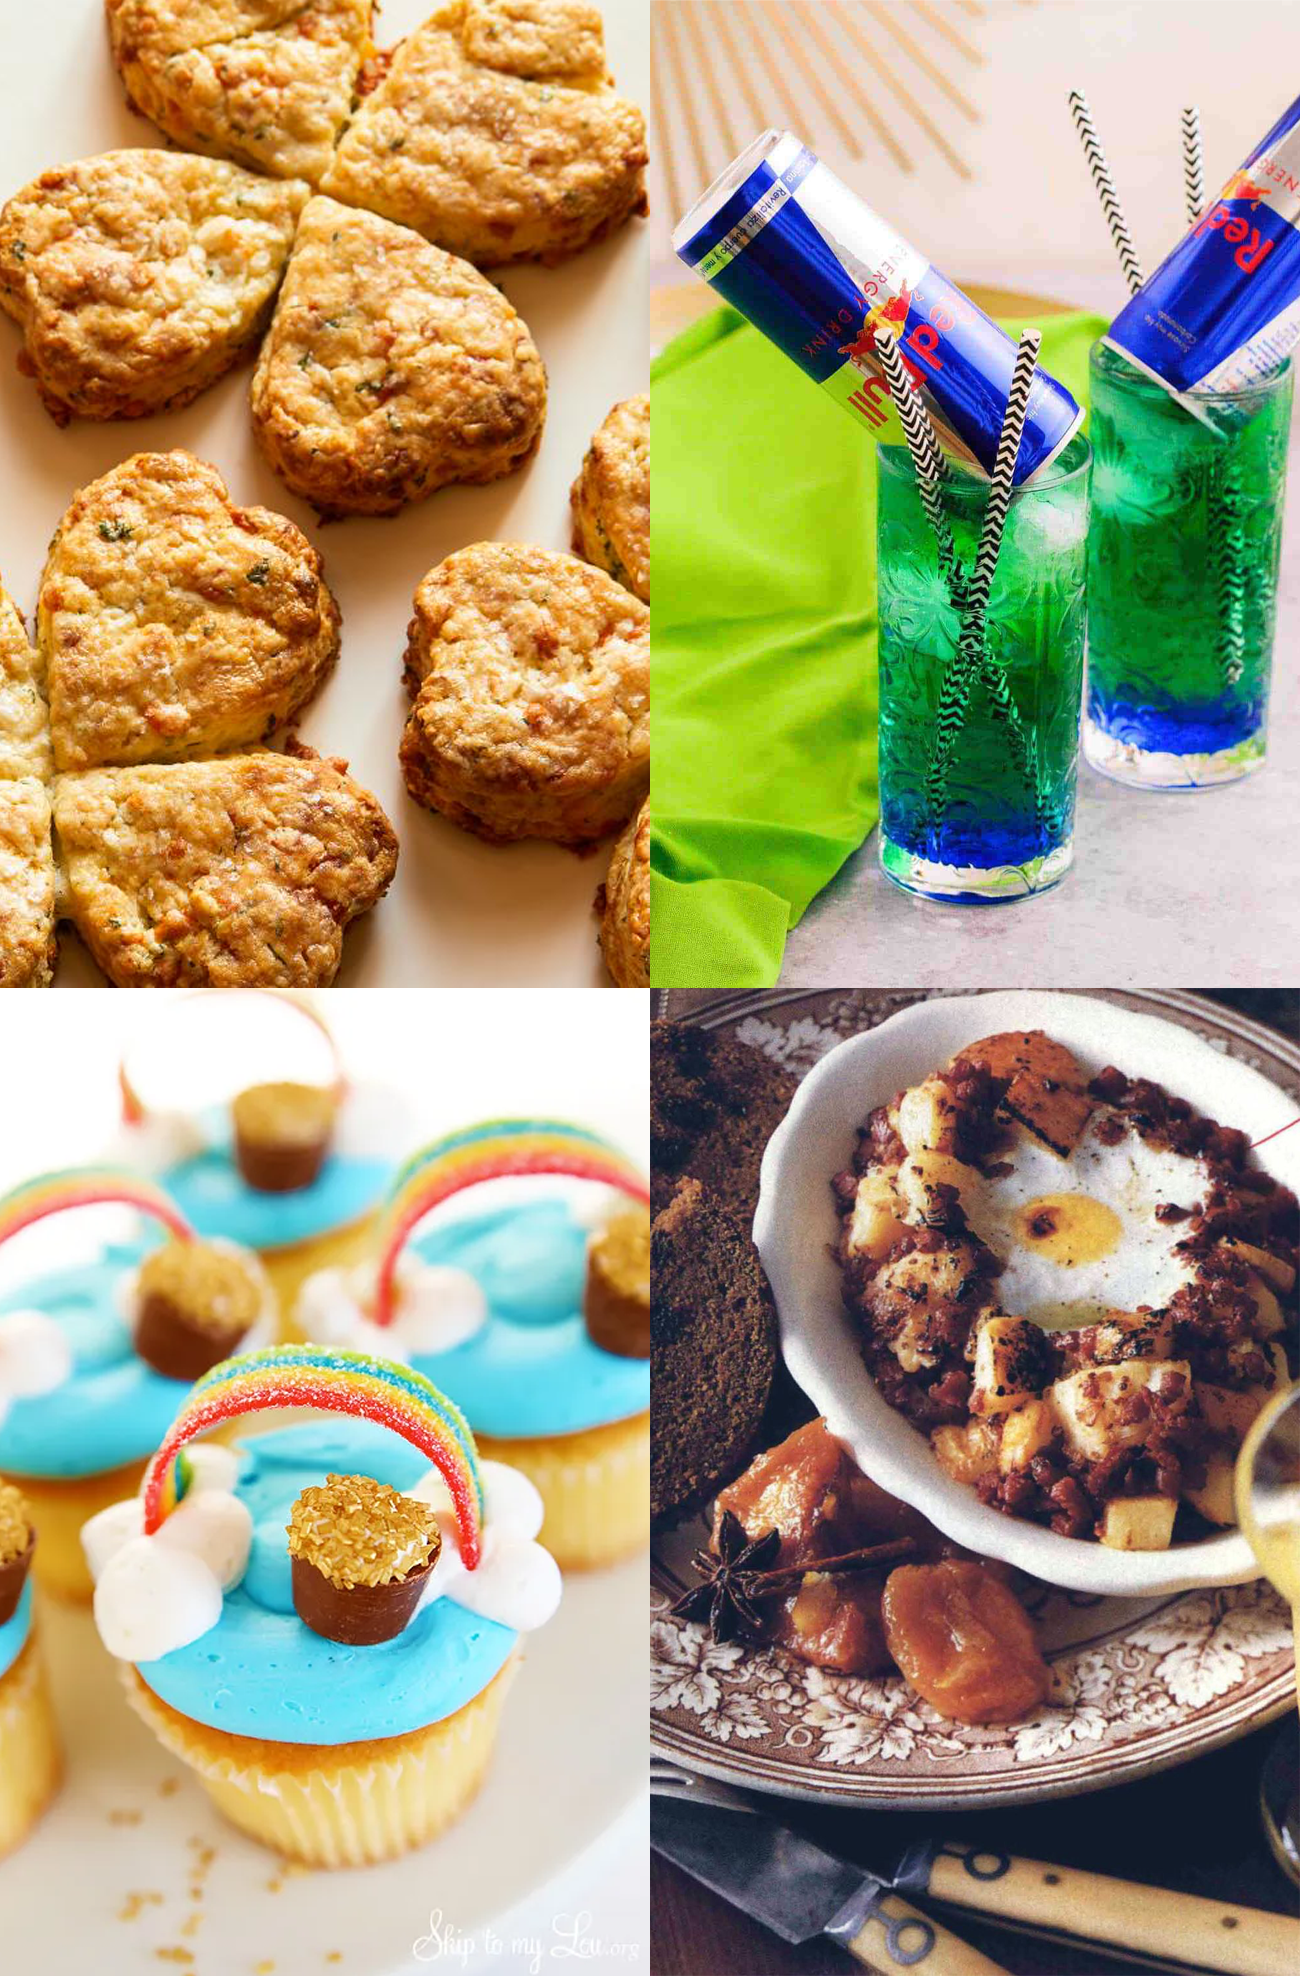 32 St. Patrick’s Day Party Food Ideas